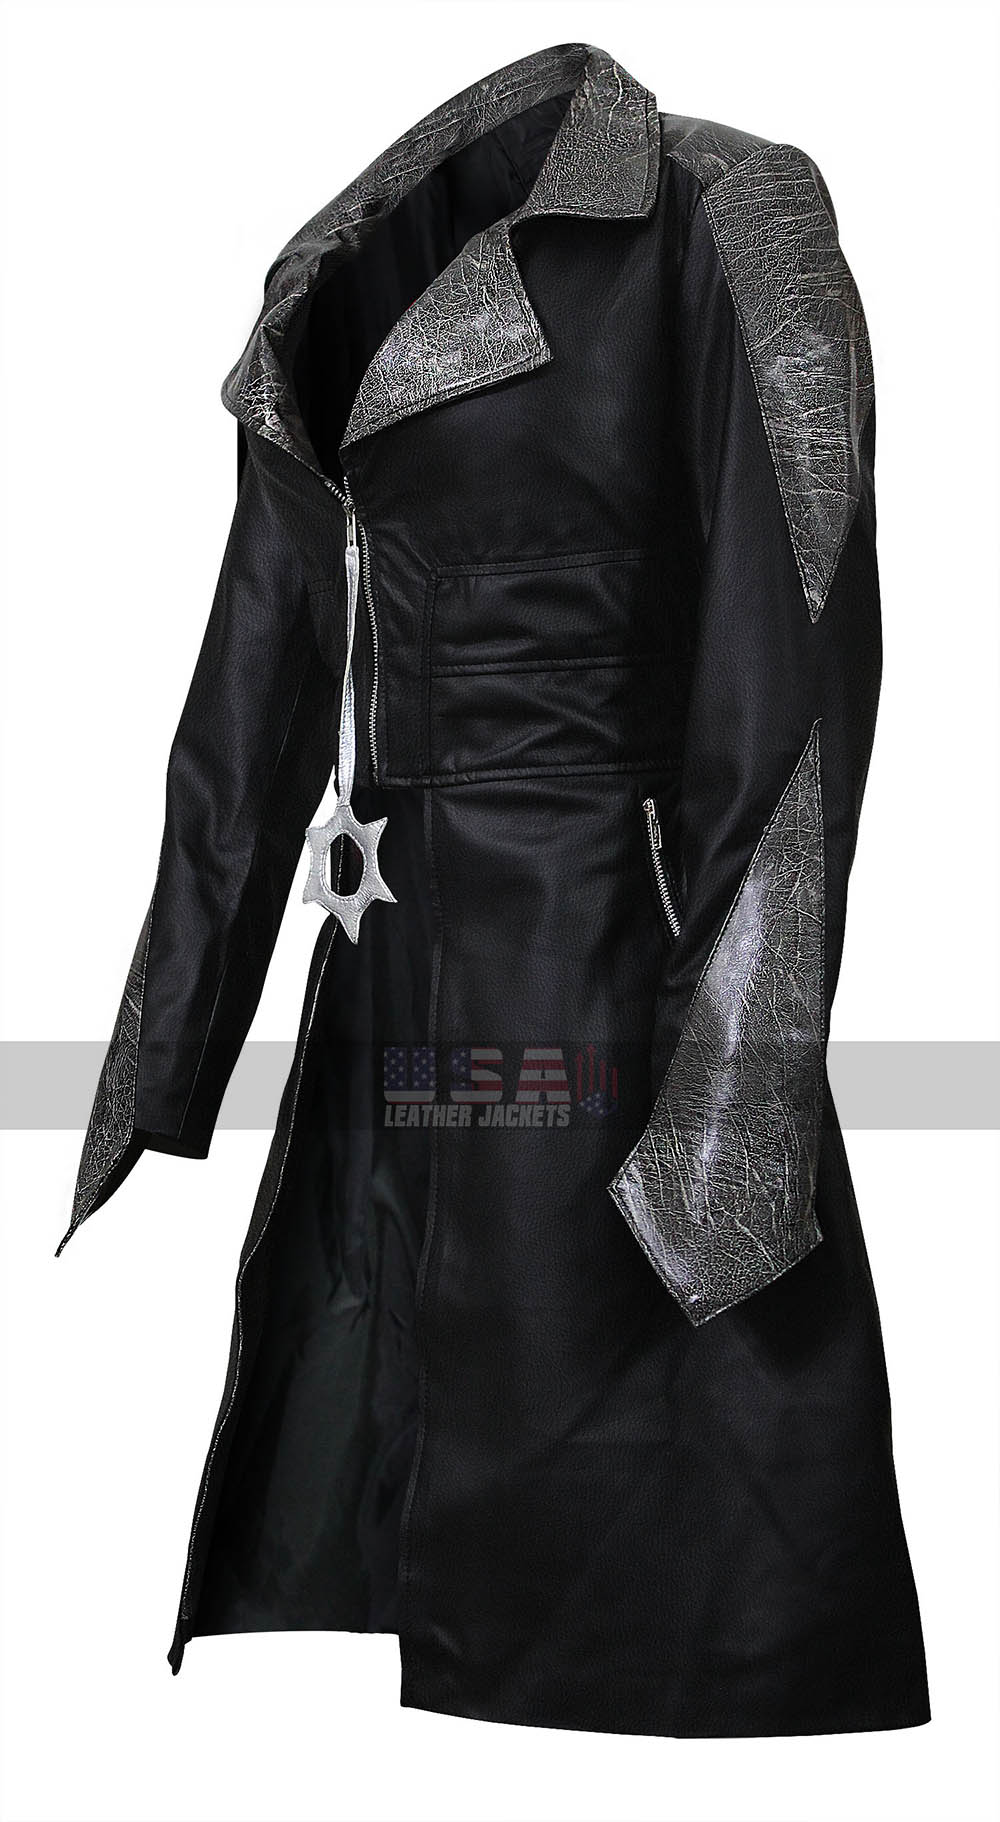 The Flash Caitlin Snow (Danielle Panabaker) Black Leather Coat